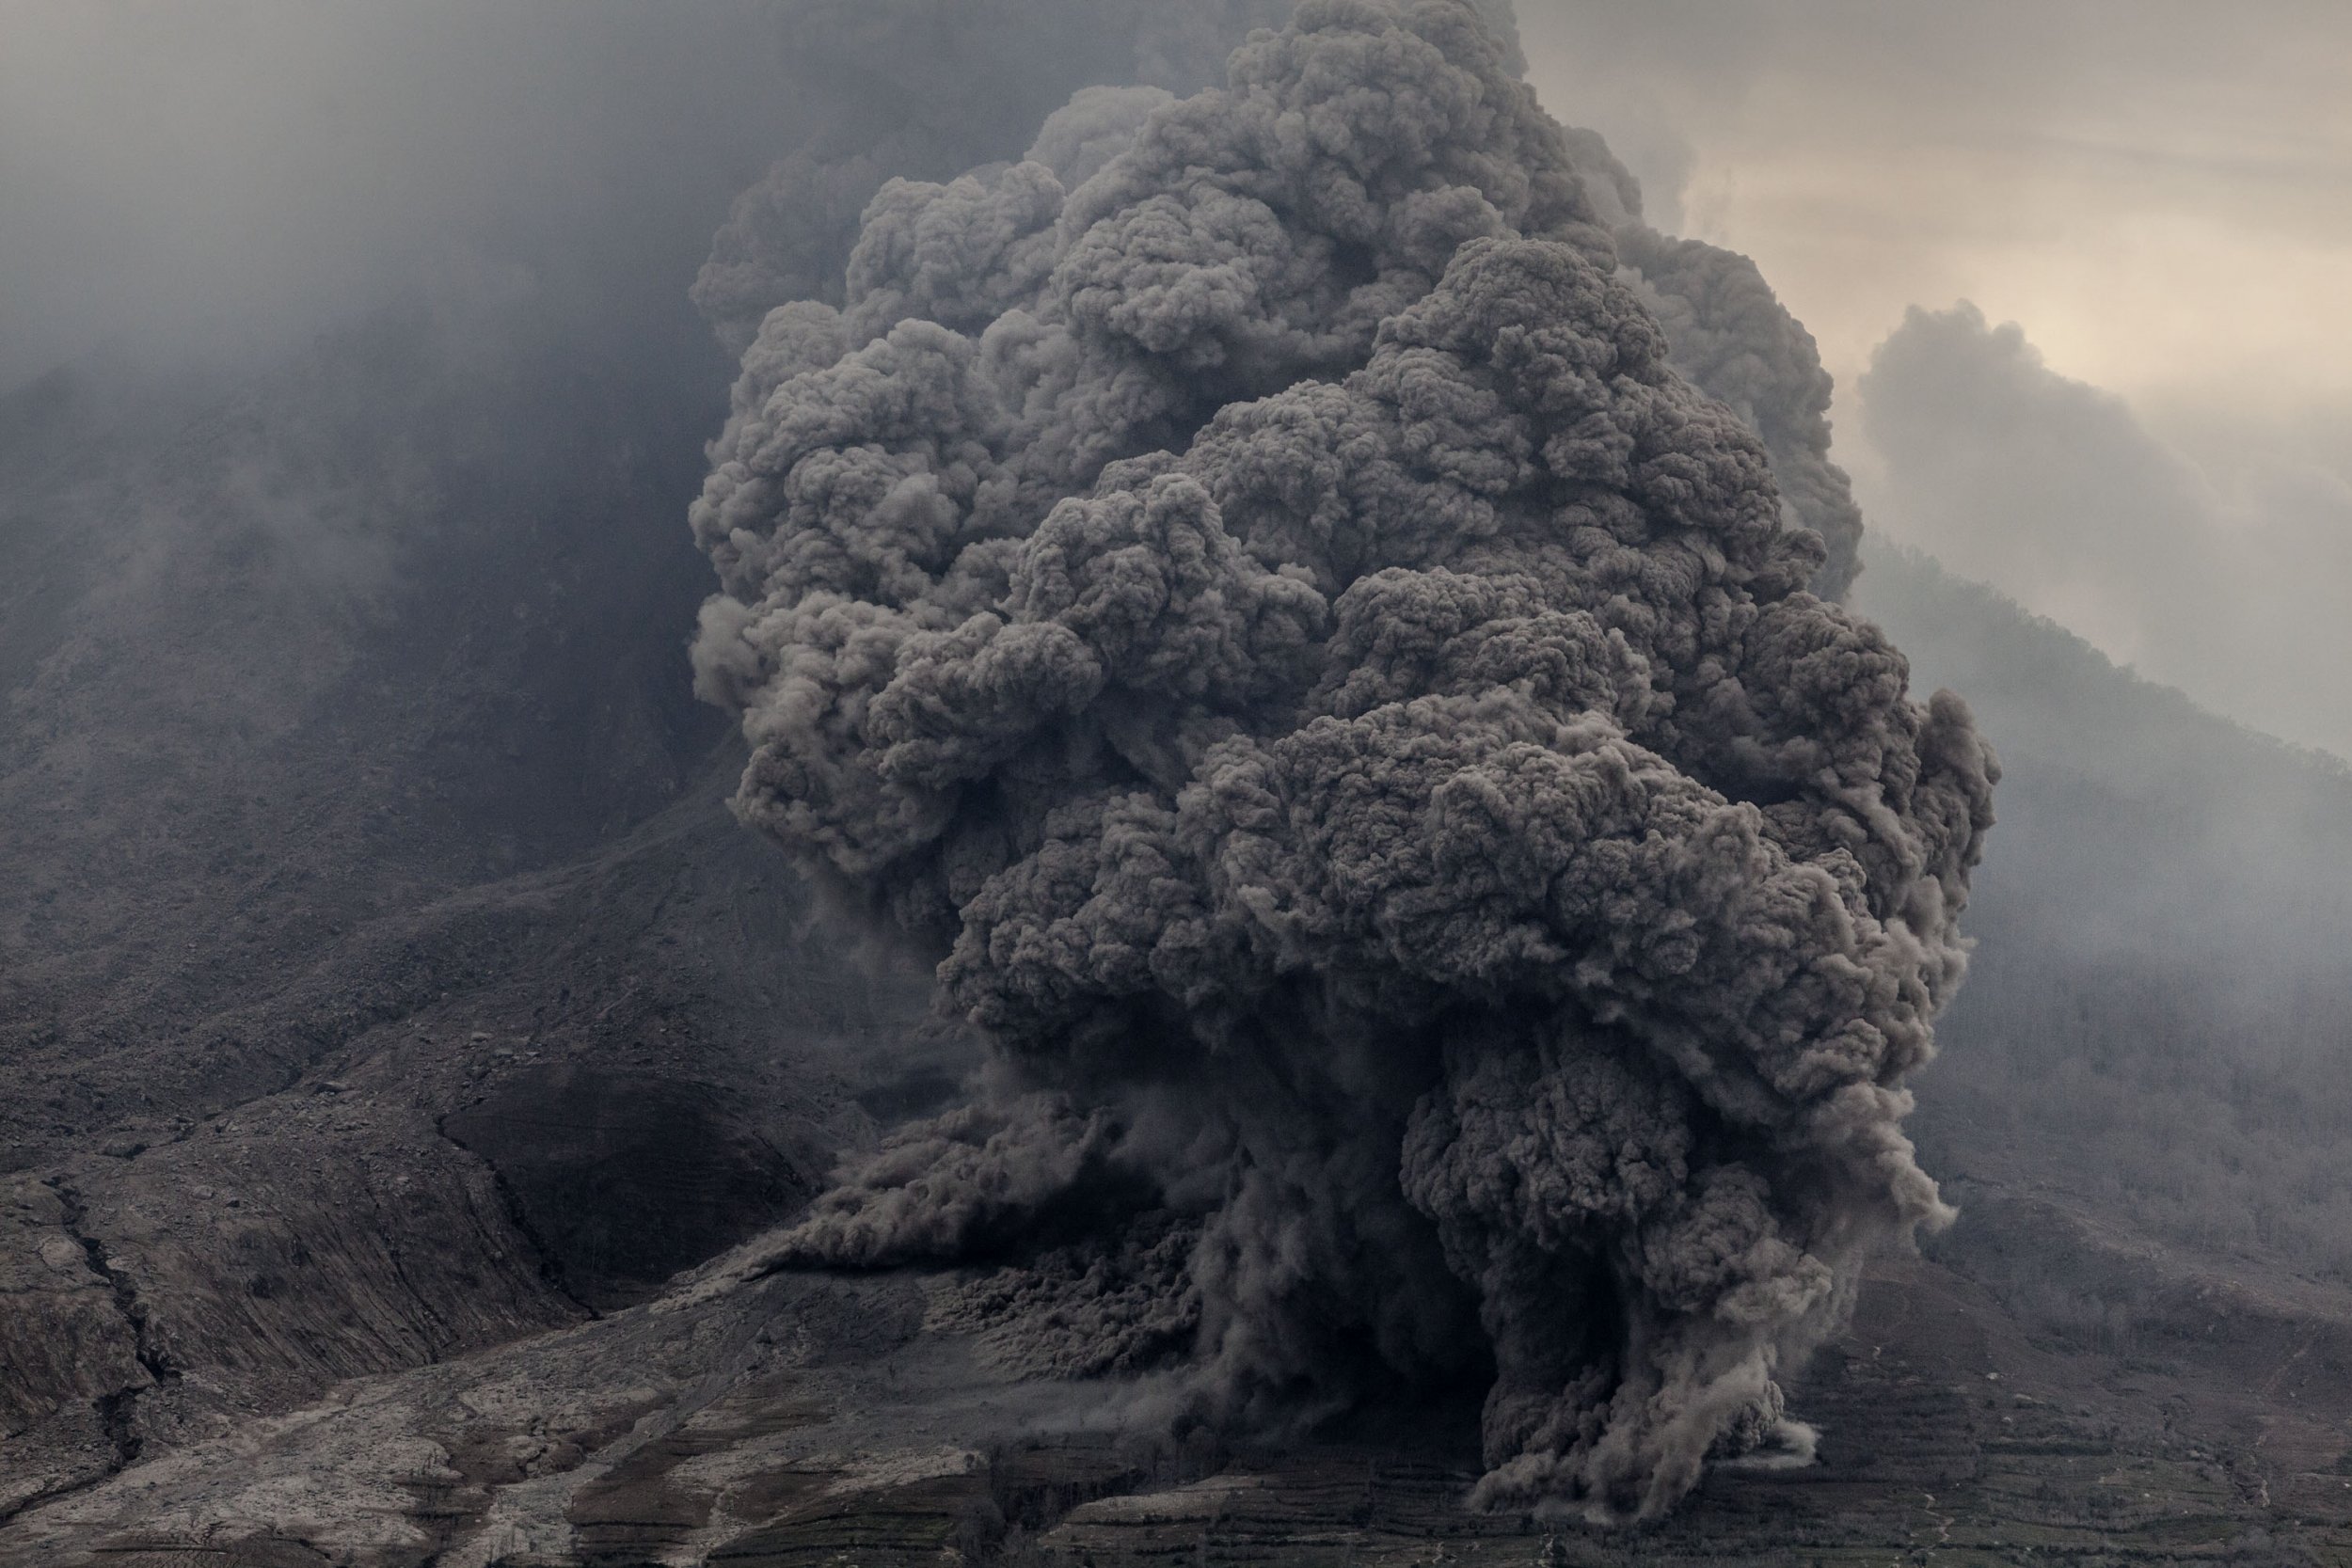  Pyroclastic  Flows  From Volcanic Eruptions Surf on Self 